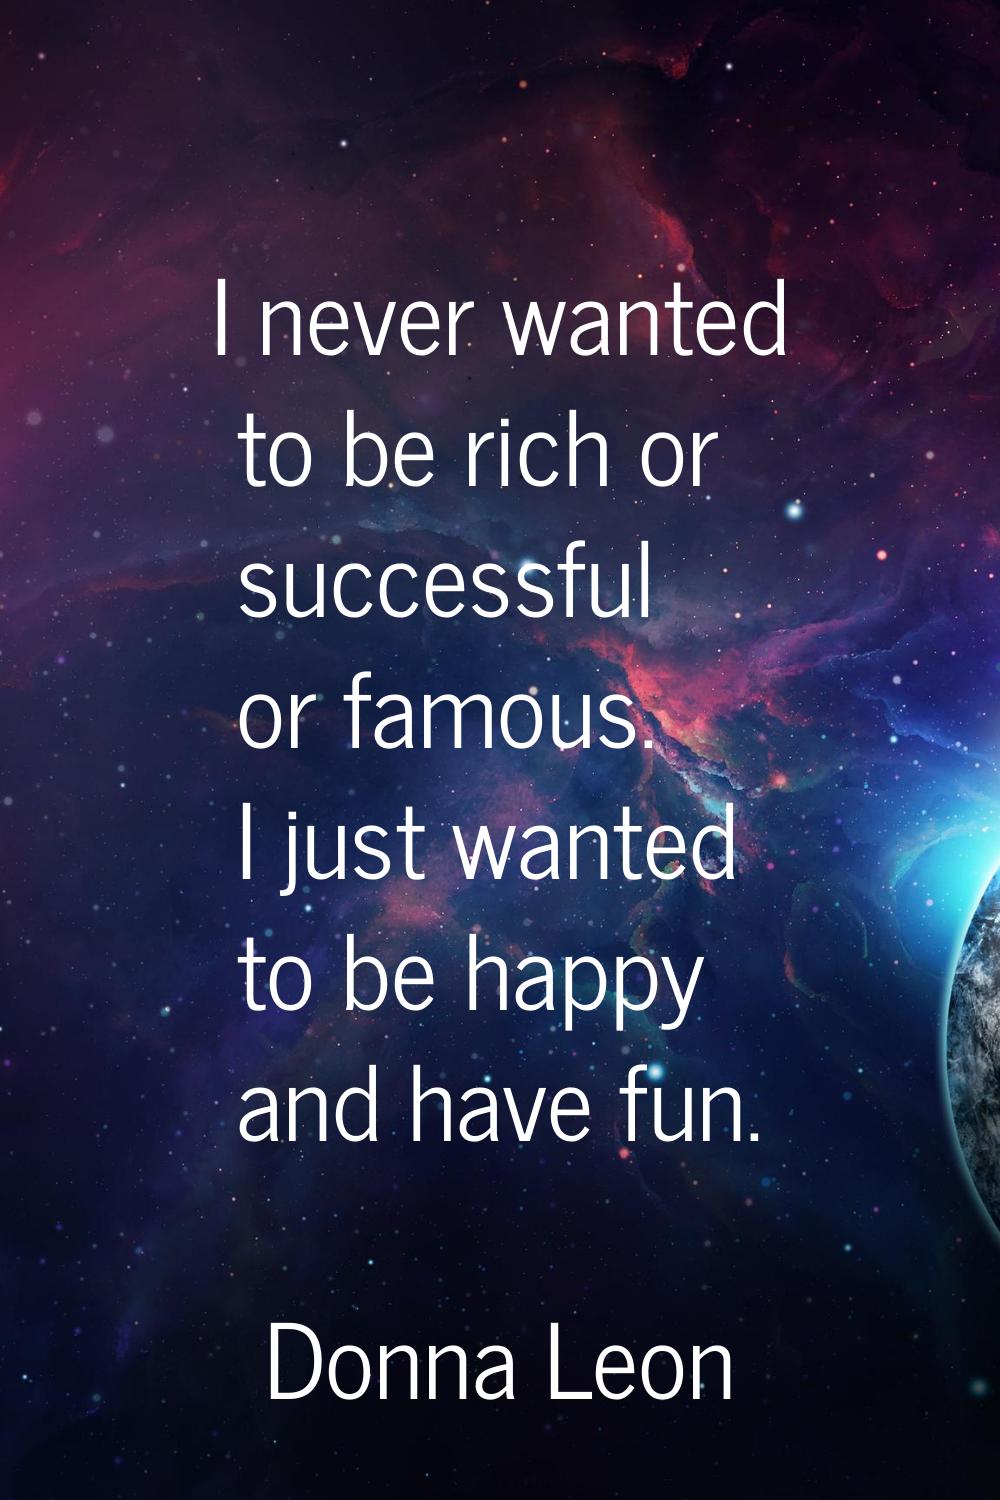 I never wanted to be rich or successful or famous. I just wanted to be happy and have fun.